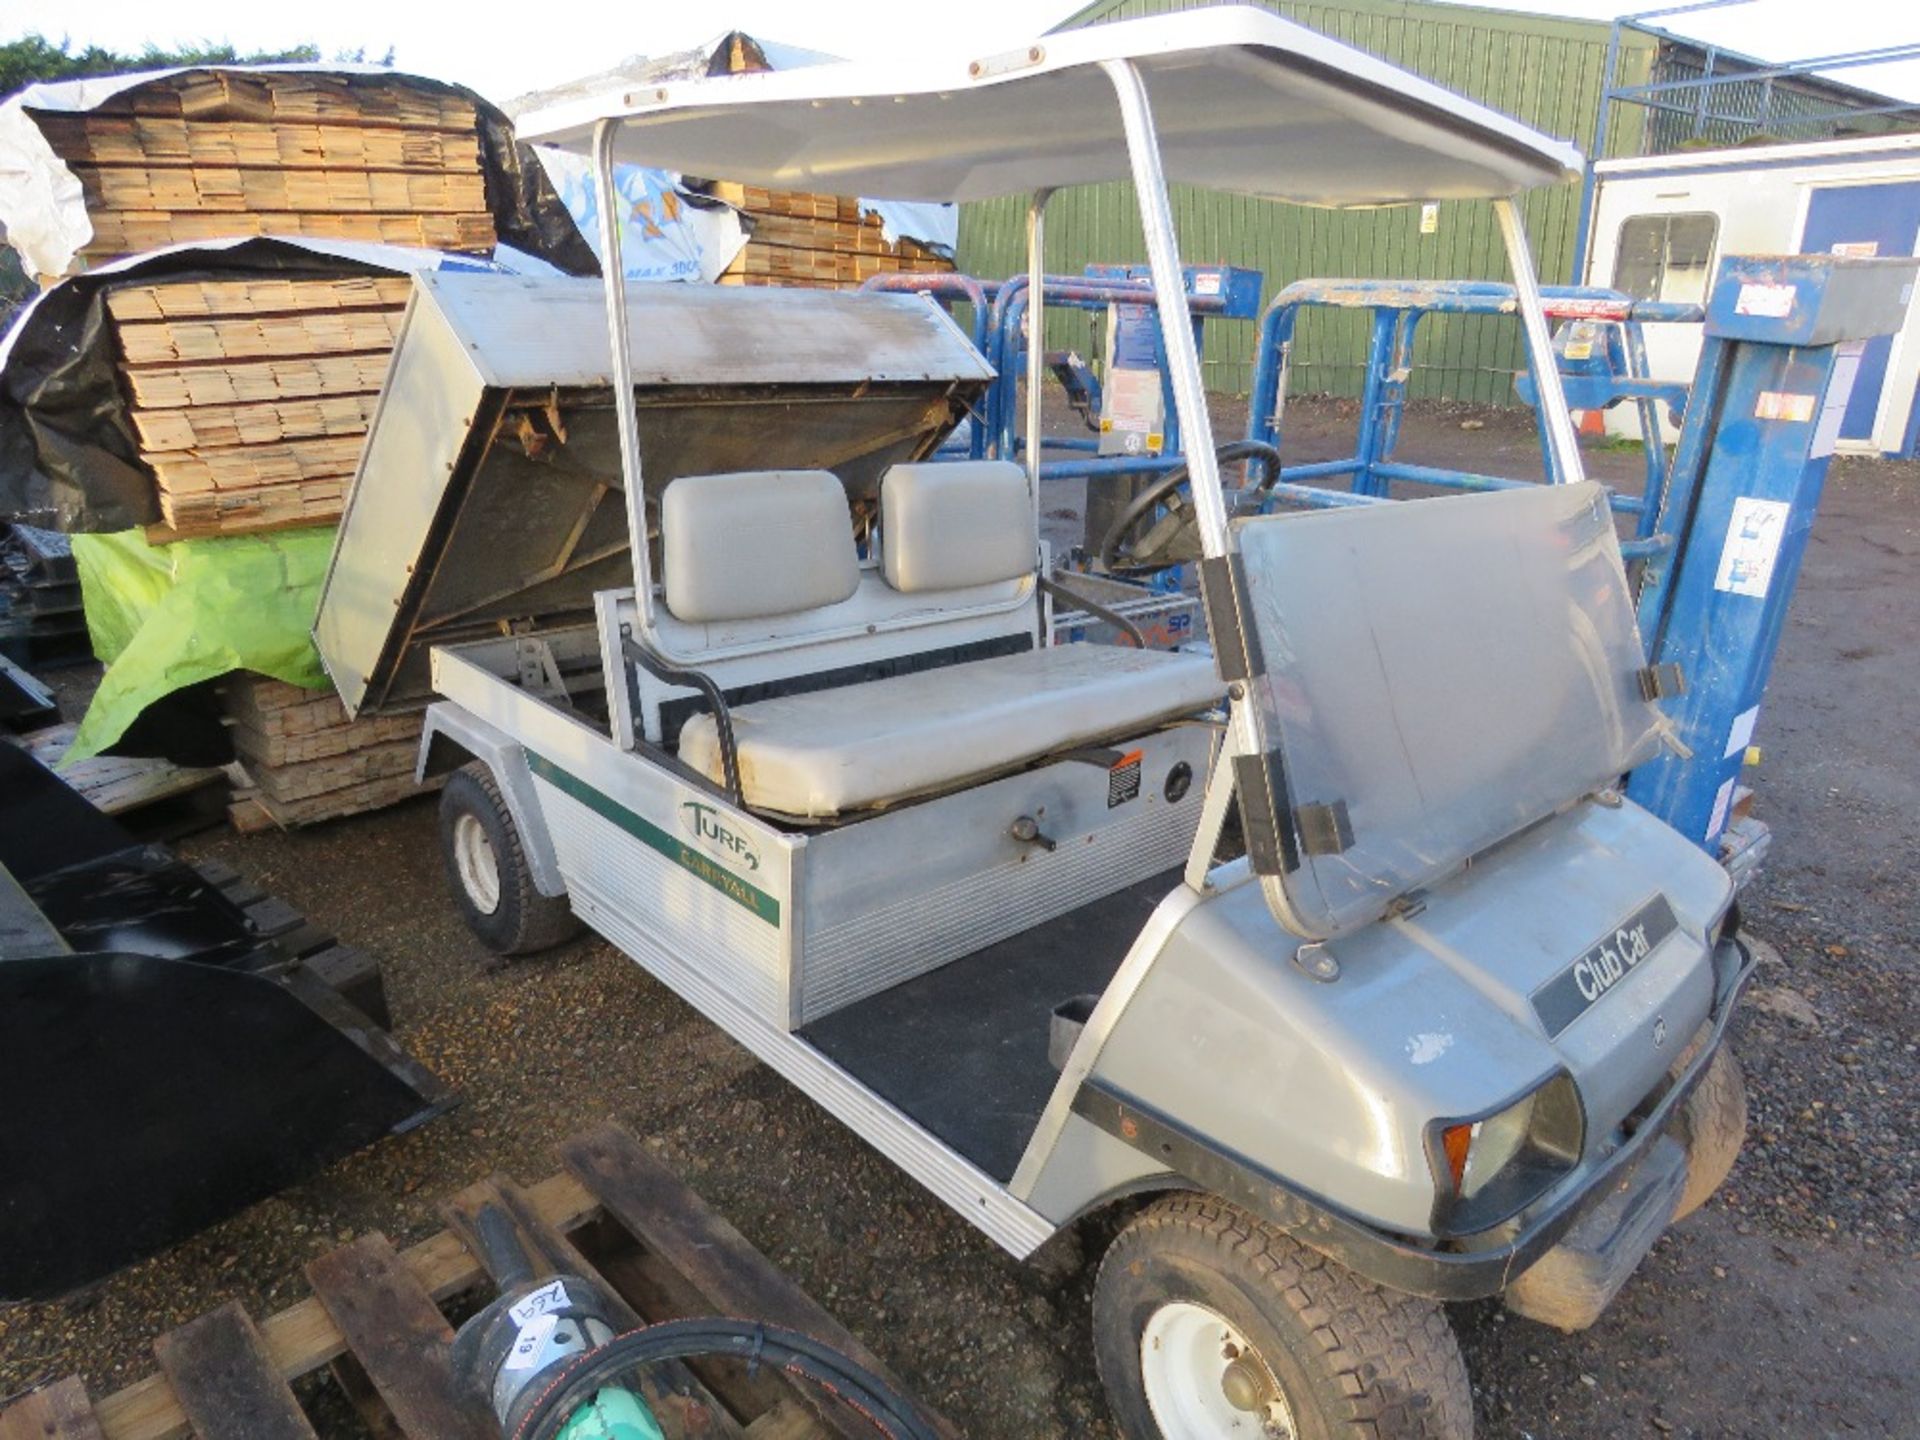 CLUBCAR CARRYALL TURF 2 PETROL ENGINED UTILITY TRUCK. WHEN TESTED WAS SEEN TO DRIVE, STEER AND BRAKE - Image 9 of 11